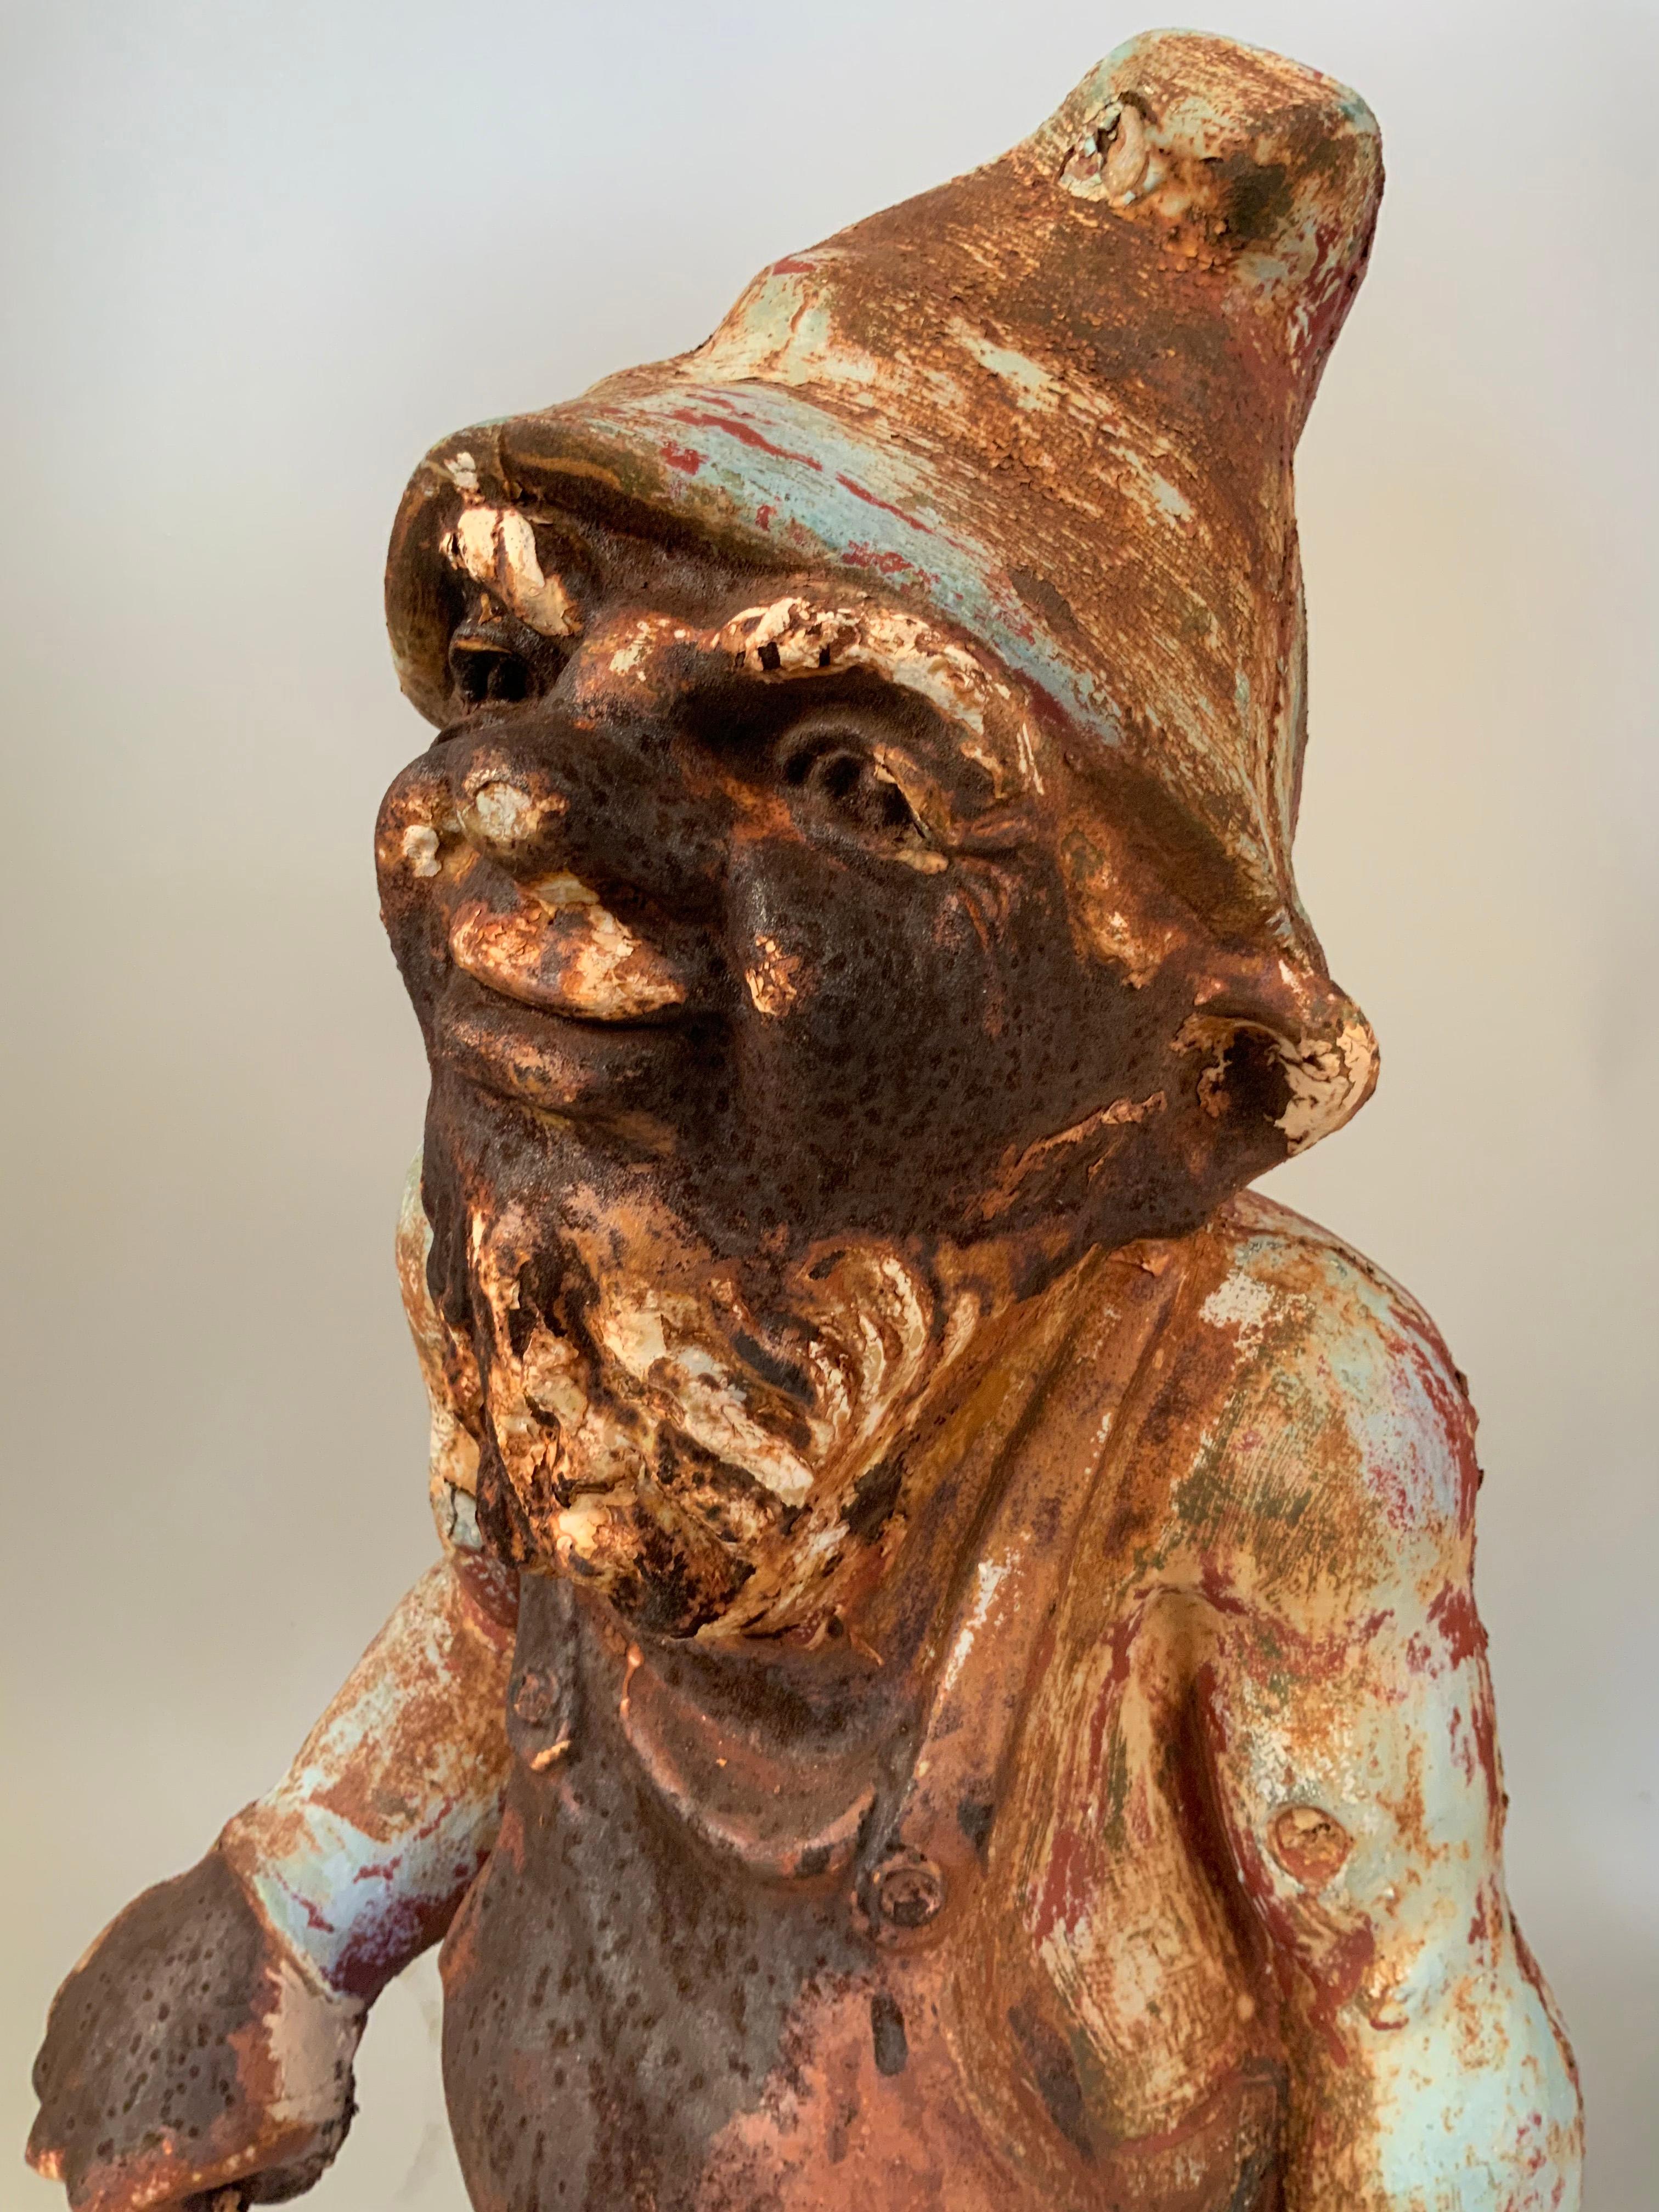 A wonderful antique American 1920s cast iron garden gnome, having a charming form and features, and expressive facial features. Age expected wear with some rusting as pictured.